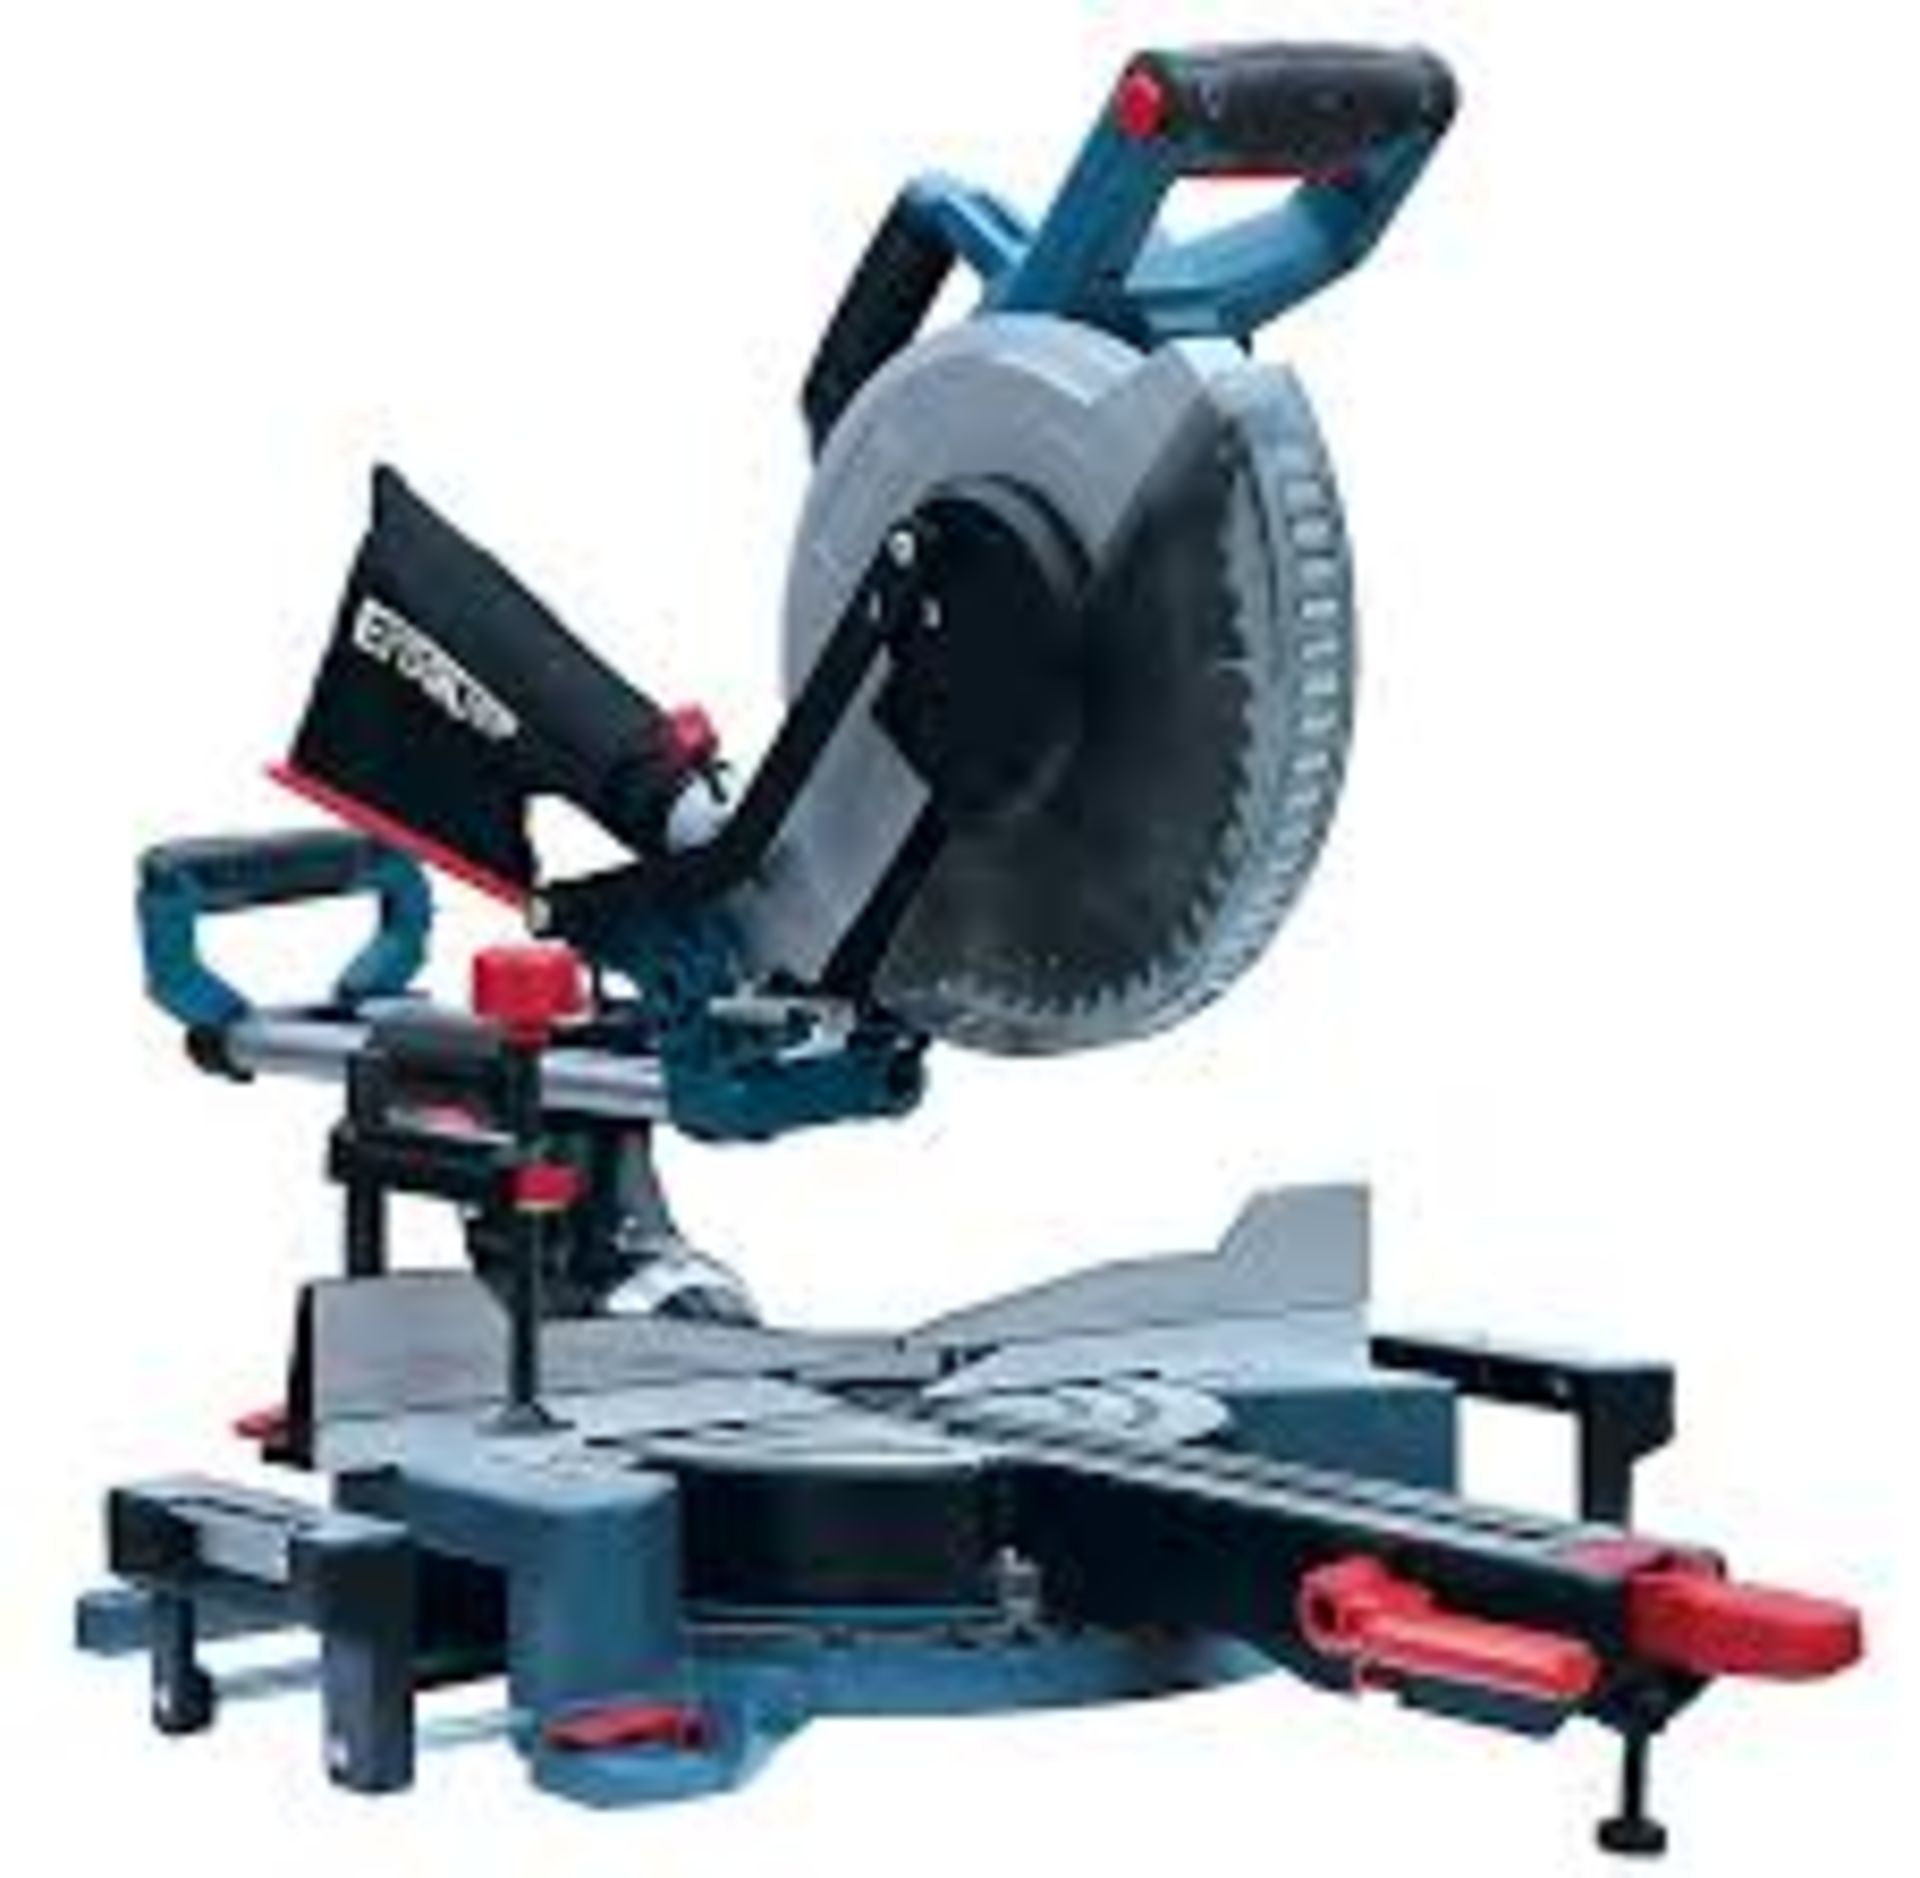 Erbauer 1800W 220-240V 254mm Corded Sliding mitre saw EMIS254S. - R10BW. Equipped with LED light and